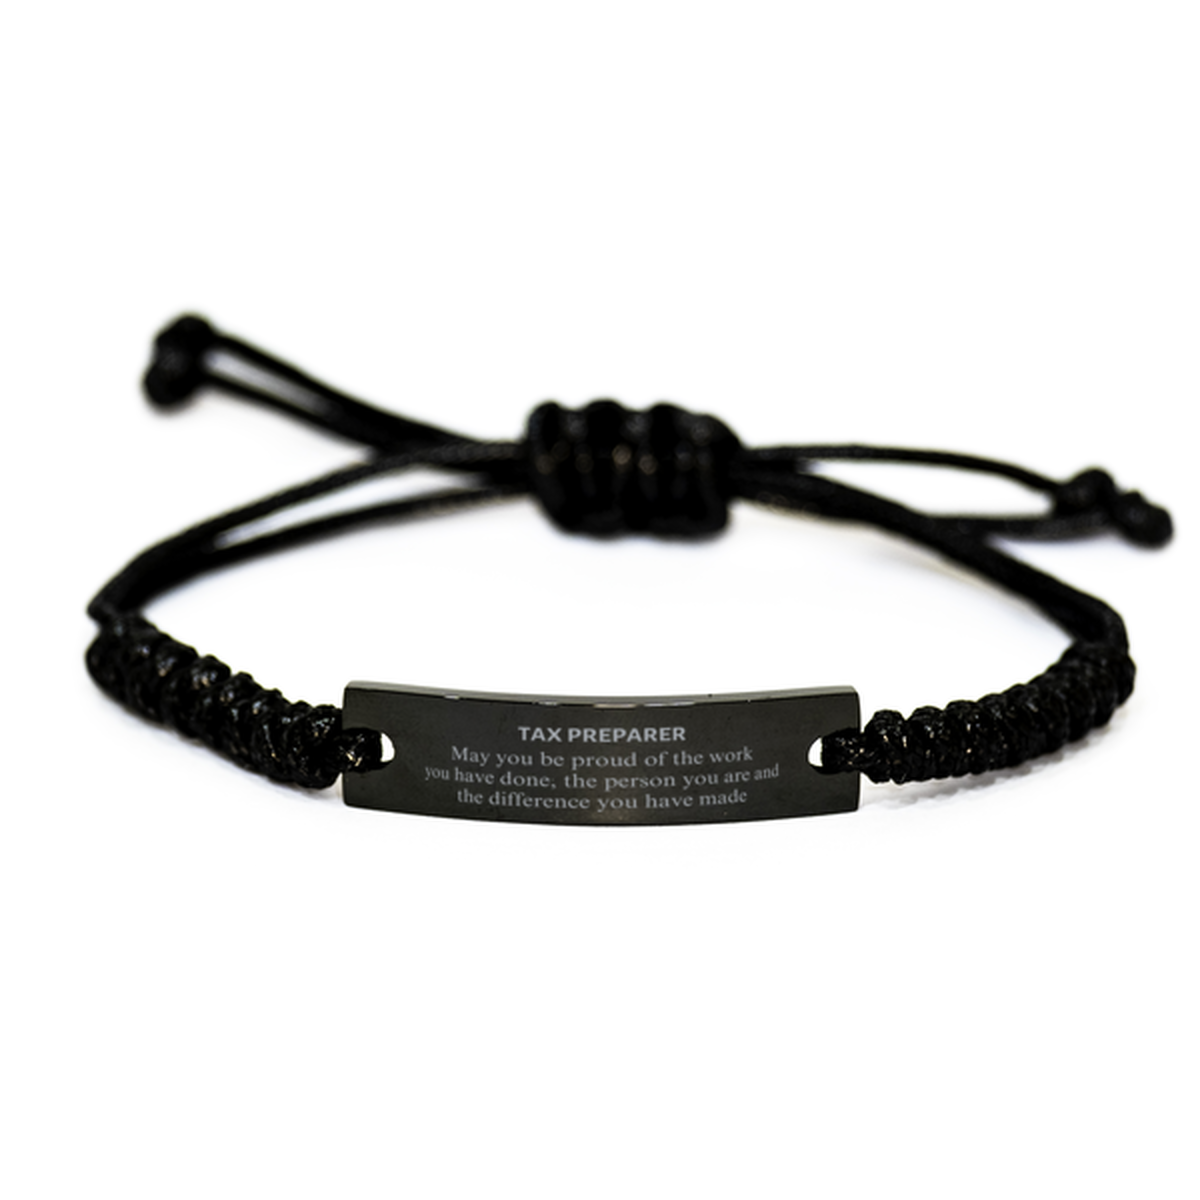 Tax Preparer May you be proud of the work you have done, Retirement Tax Preparer Black Rope Bracelet for Colleague Appreciation Gifts Amazing for Tax Preparer